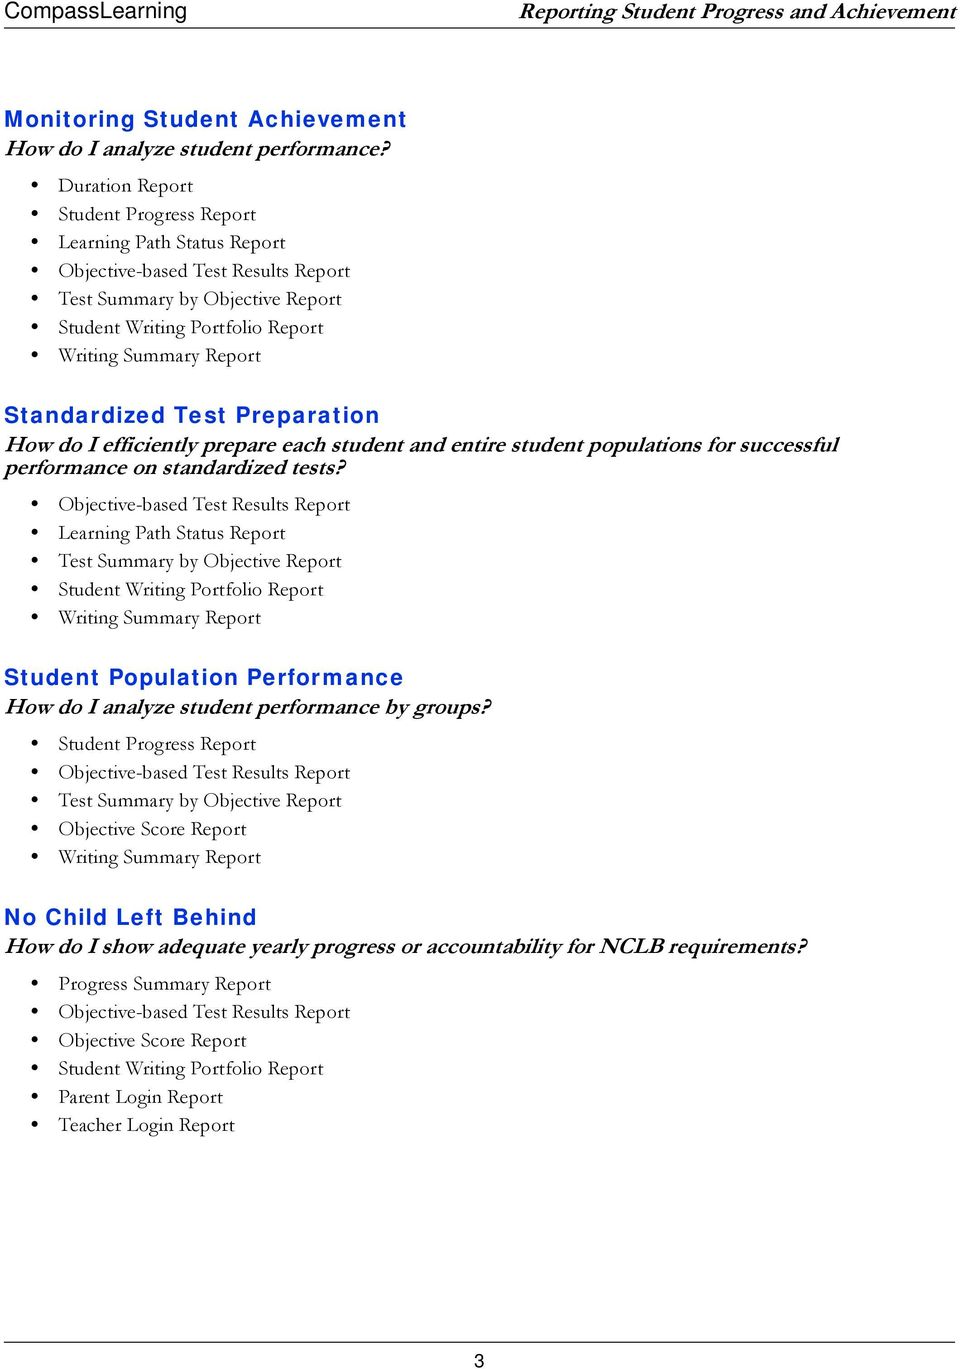 Standardized Test Preparation How do I efficiently prepare each student and entire student populations for successful performance on standardized tests?